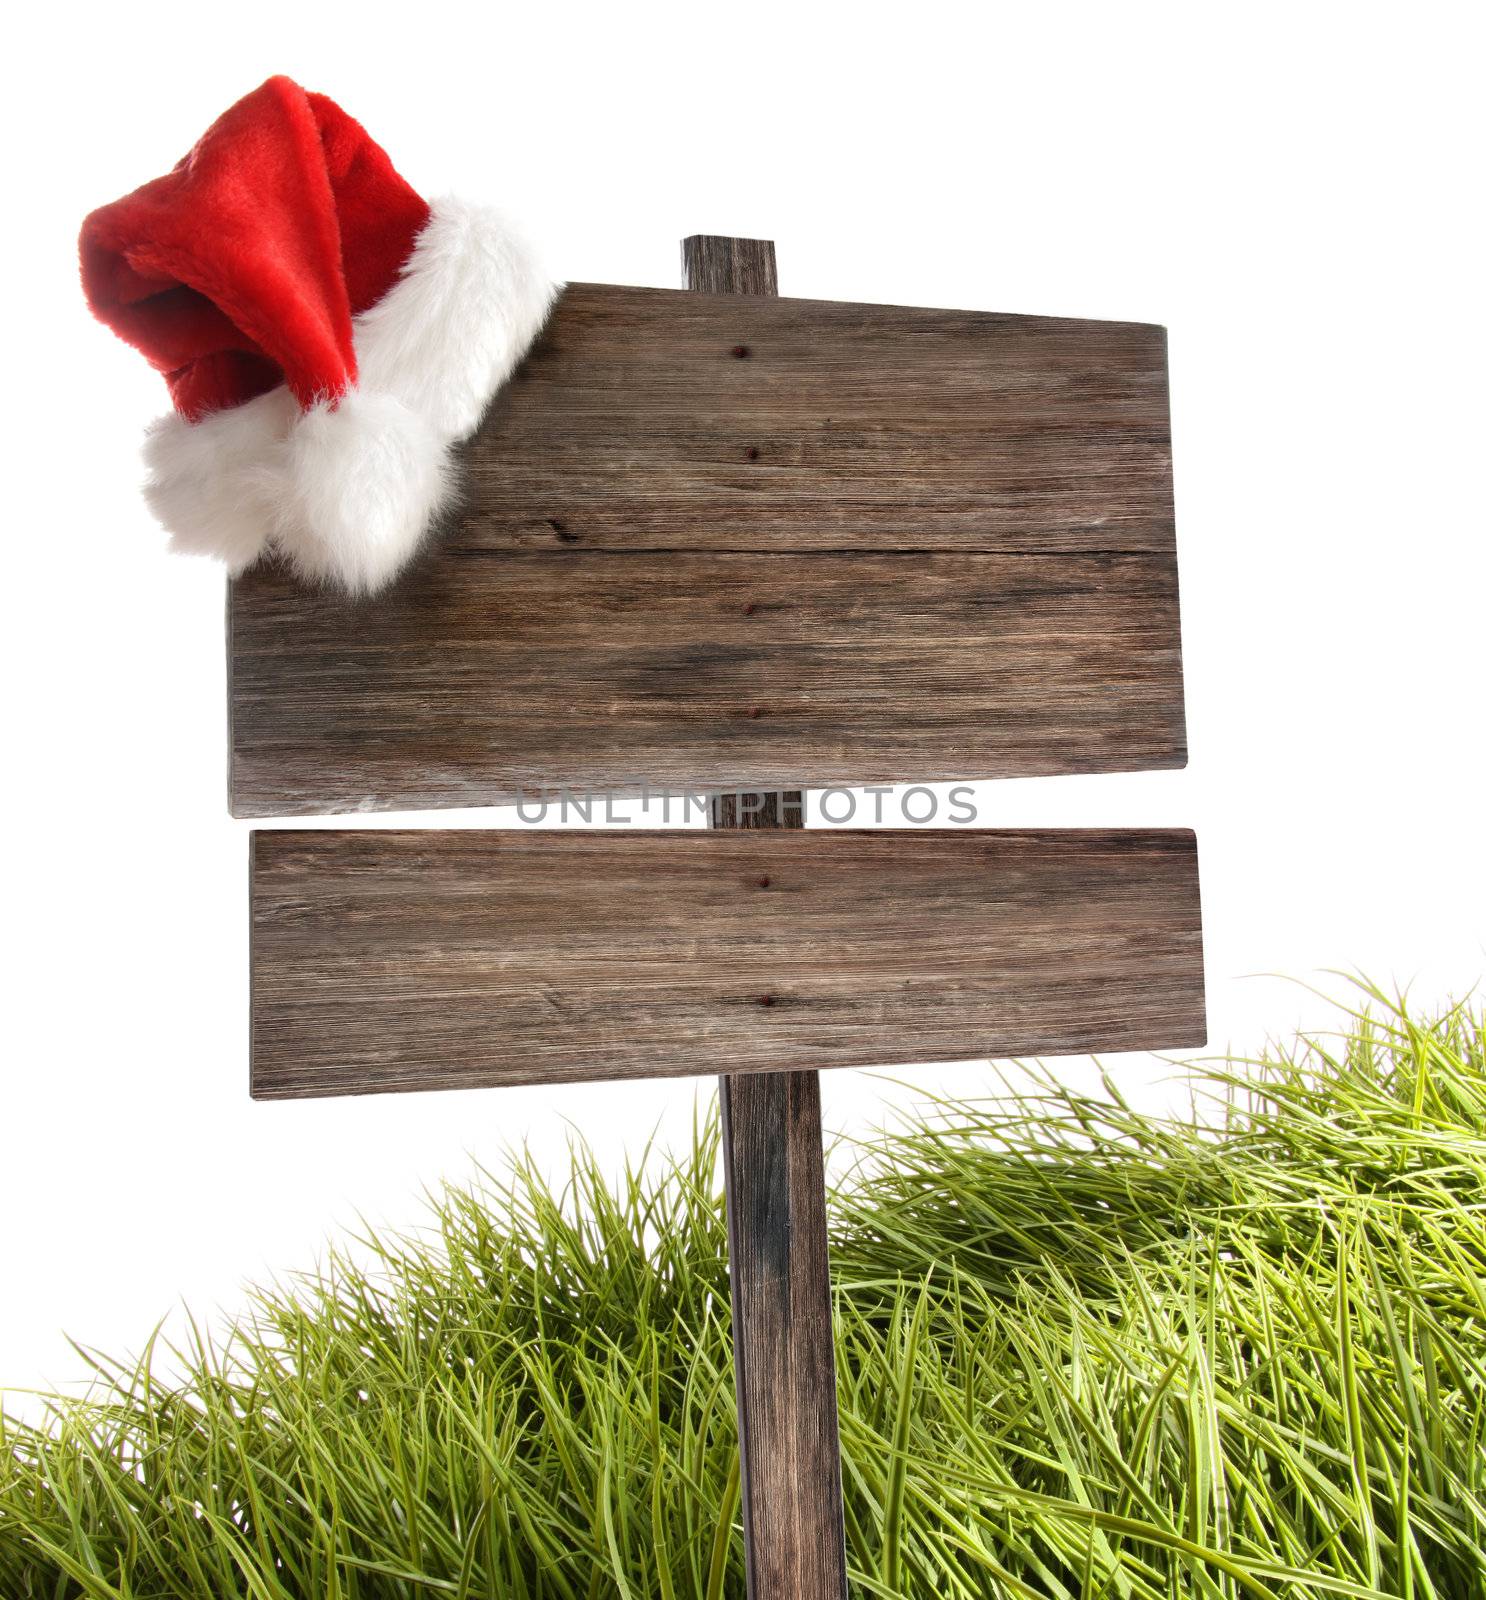 Weathered wooden sign with santa hat on white  by Sandralise